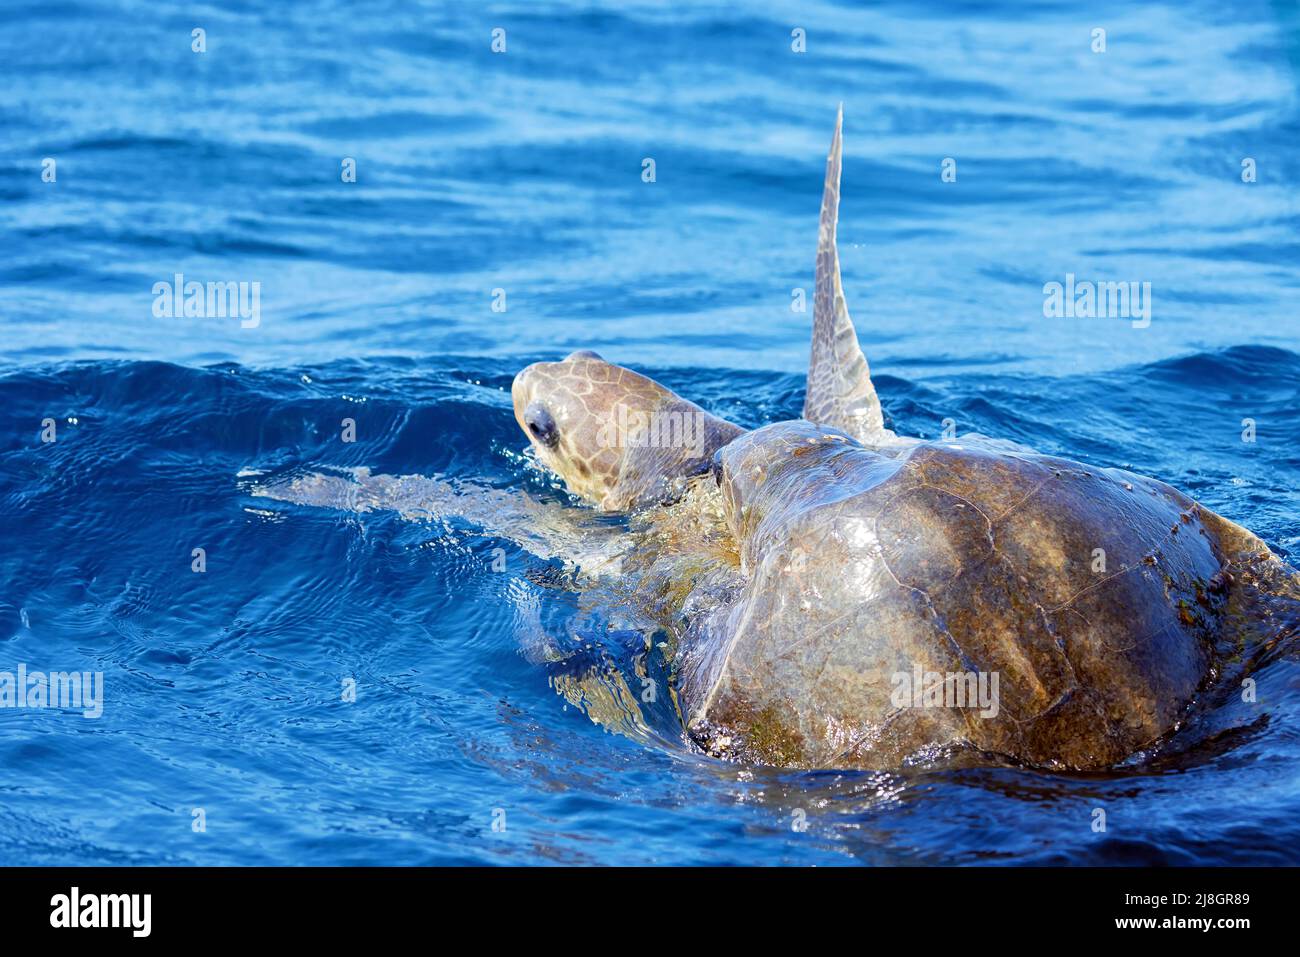 Mating of sea turtles in the open ocean. Olive ridley sea turtles or Lepidochelys olivacea during the mating games. Stock Photo